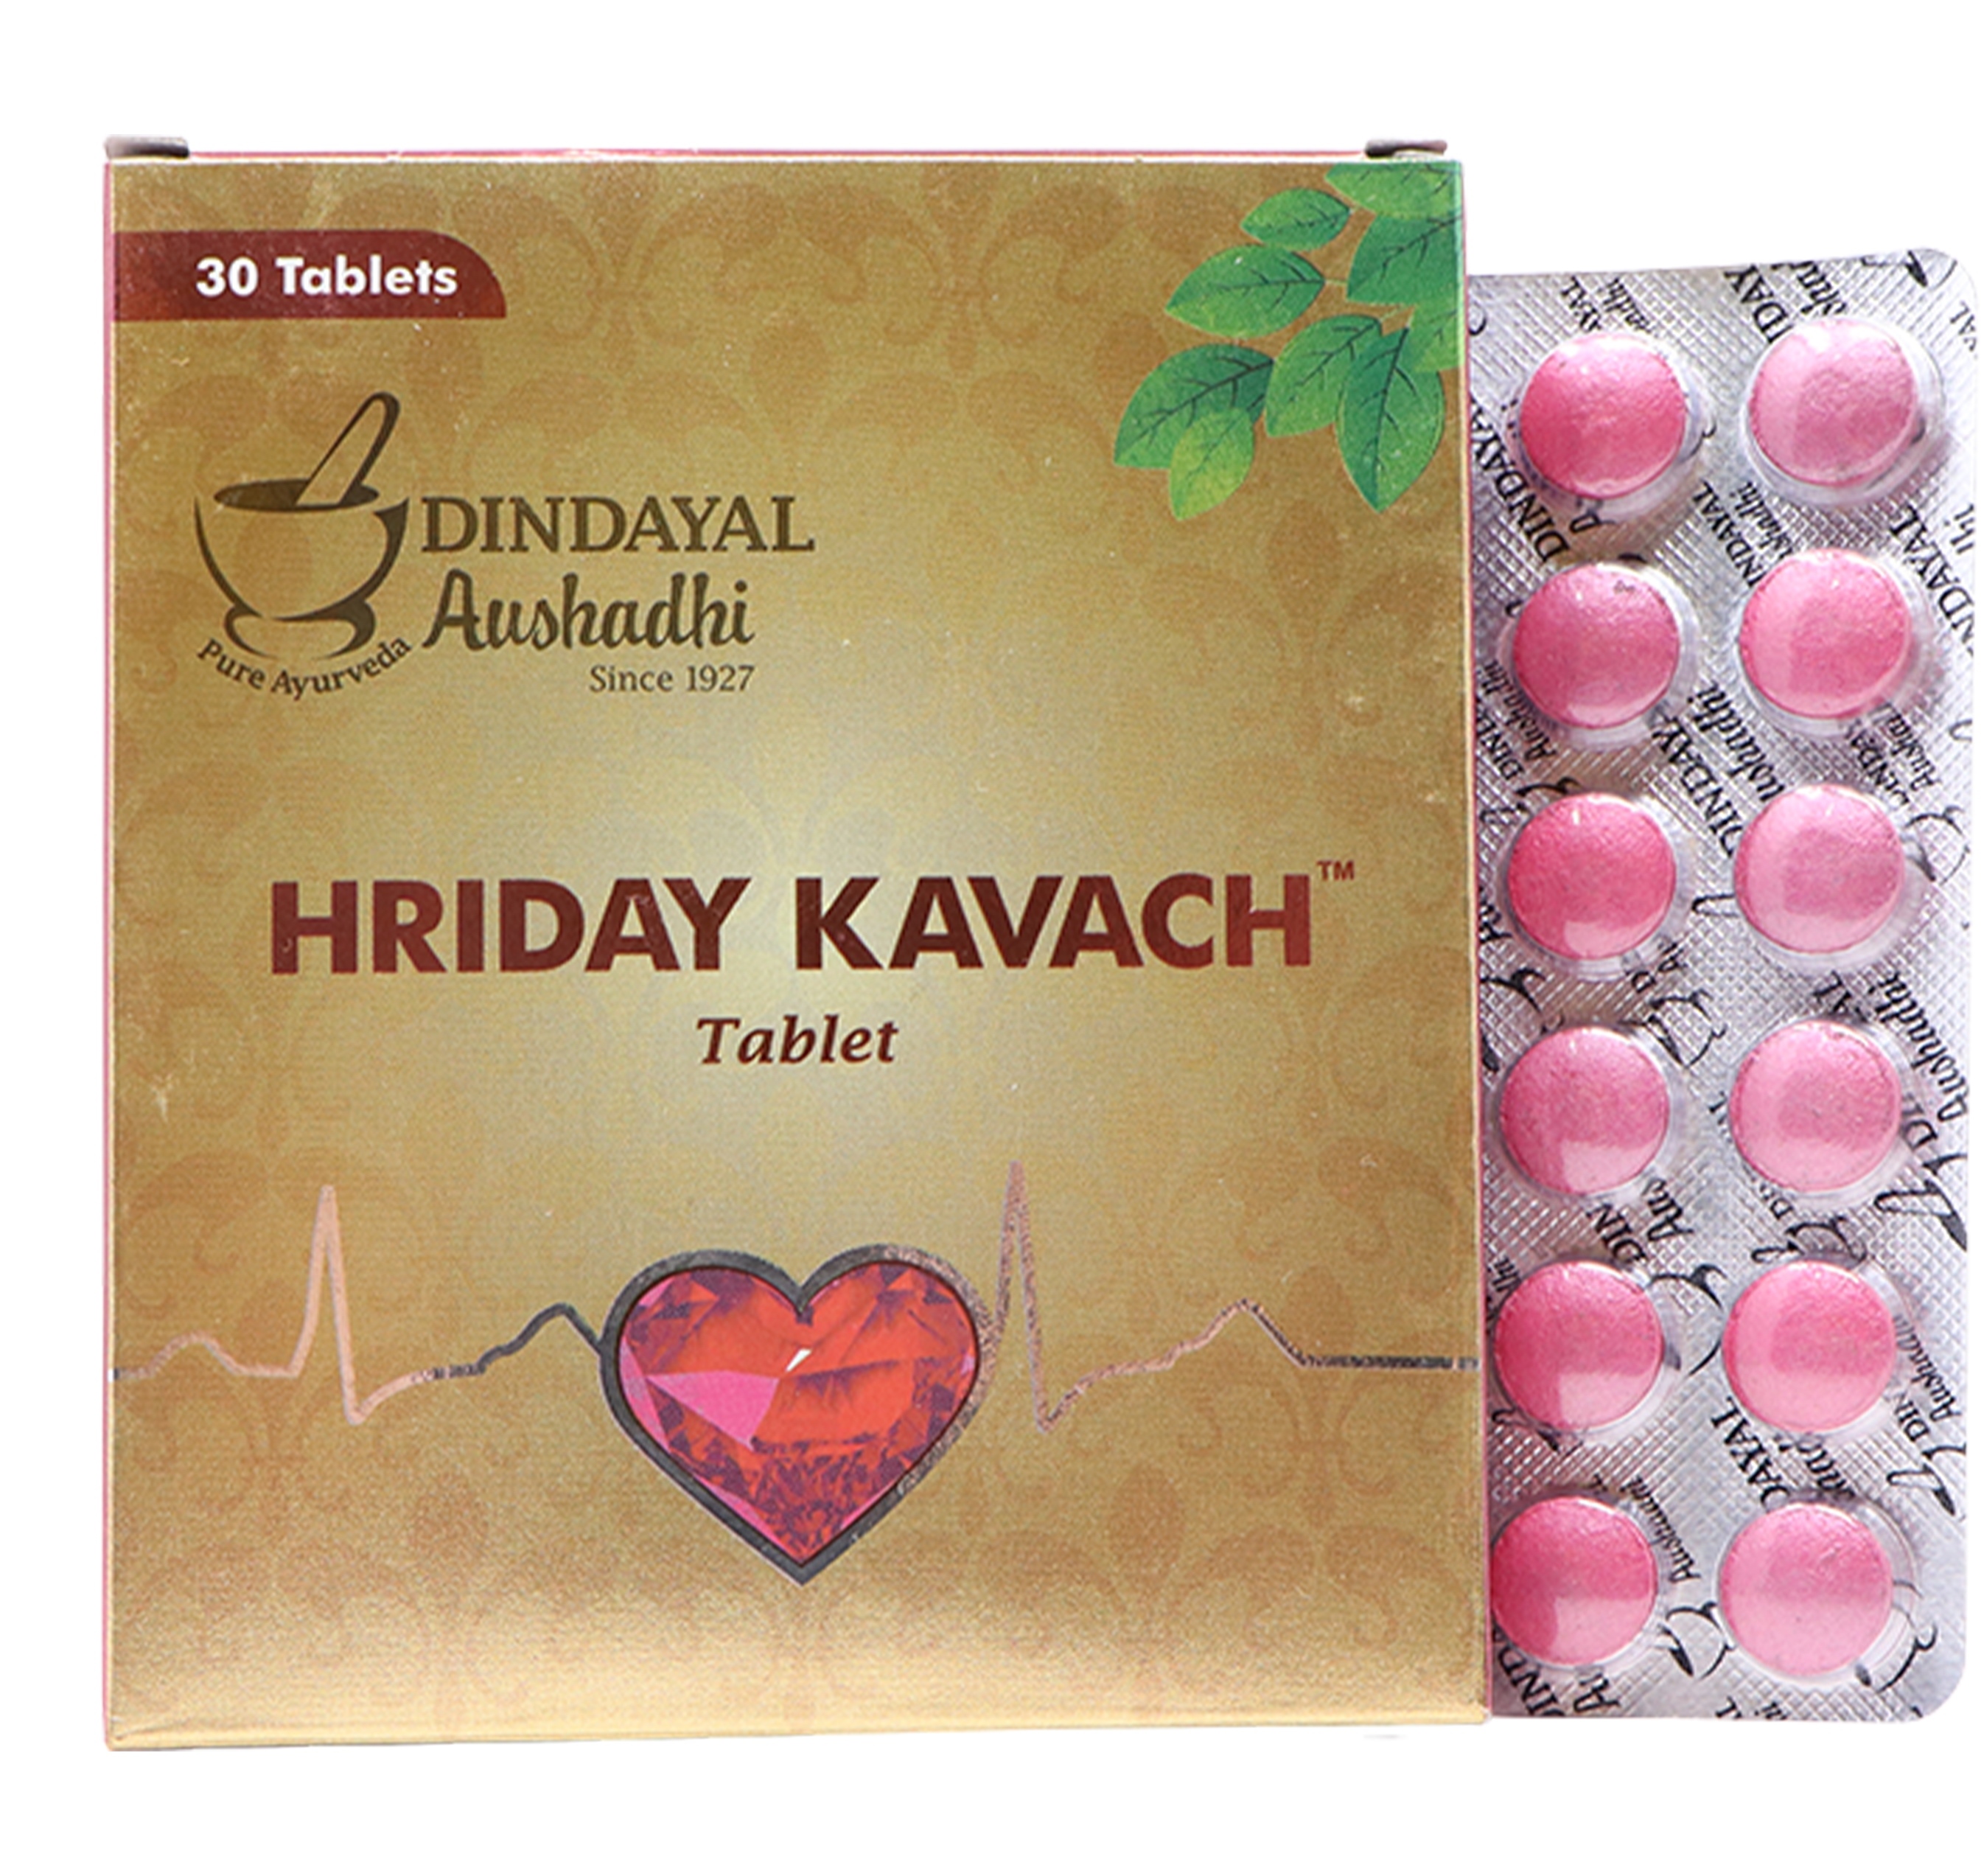 Buy Dindayal Aushadhi Hriday Kavach Tablet at Best Price Online